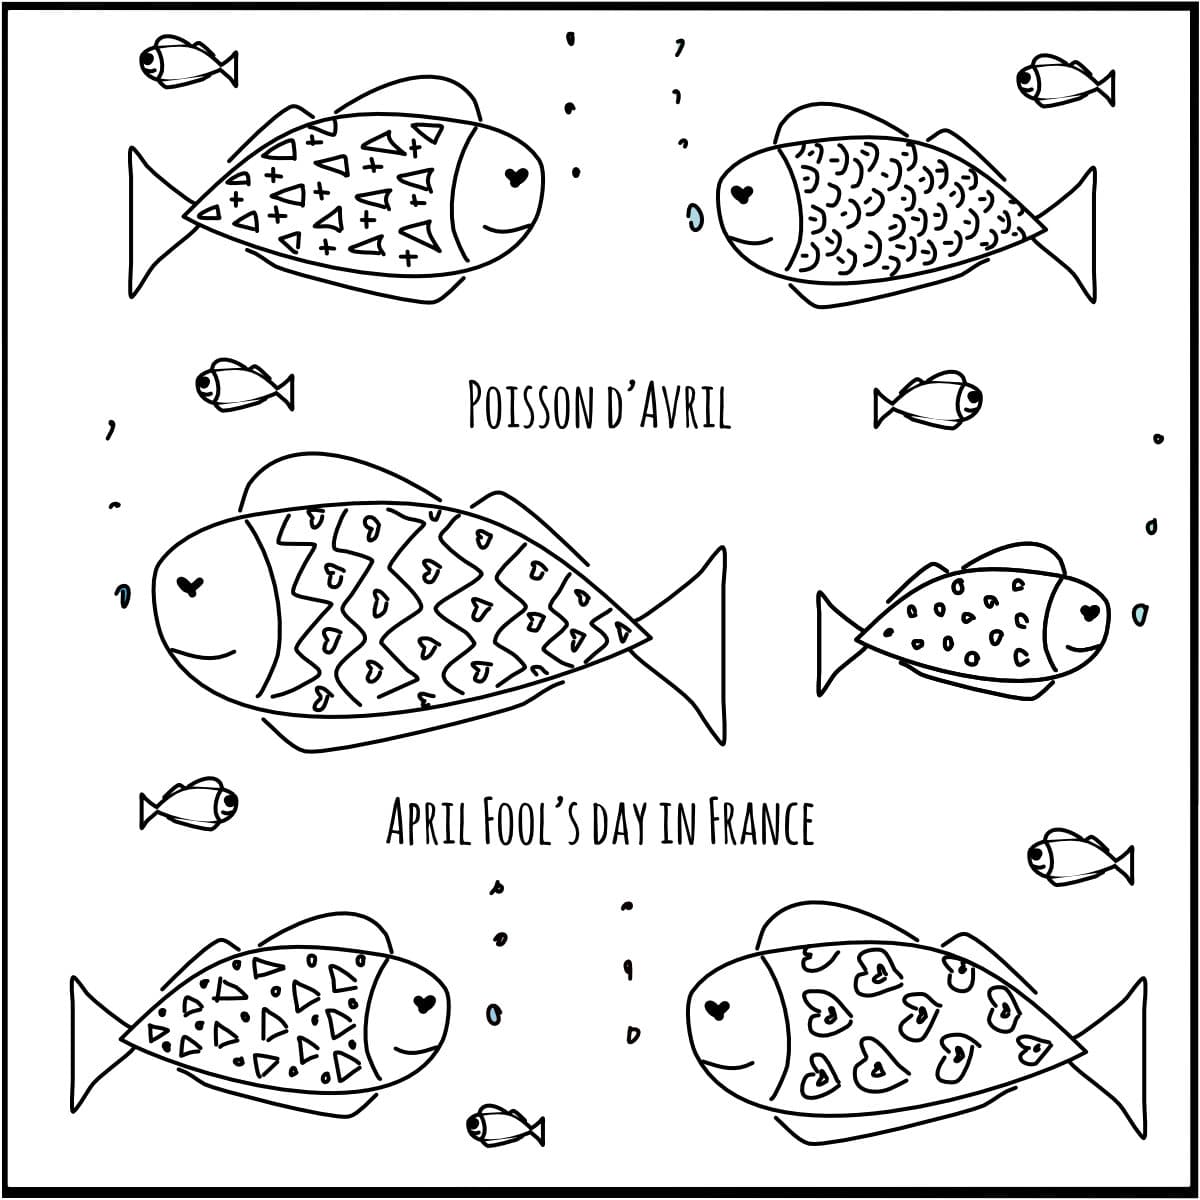 You are currently viewing Poisson d’avril: April fool’s day in France